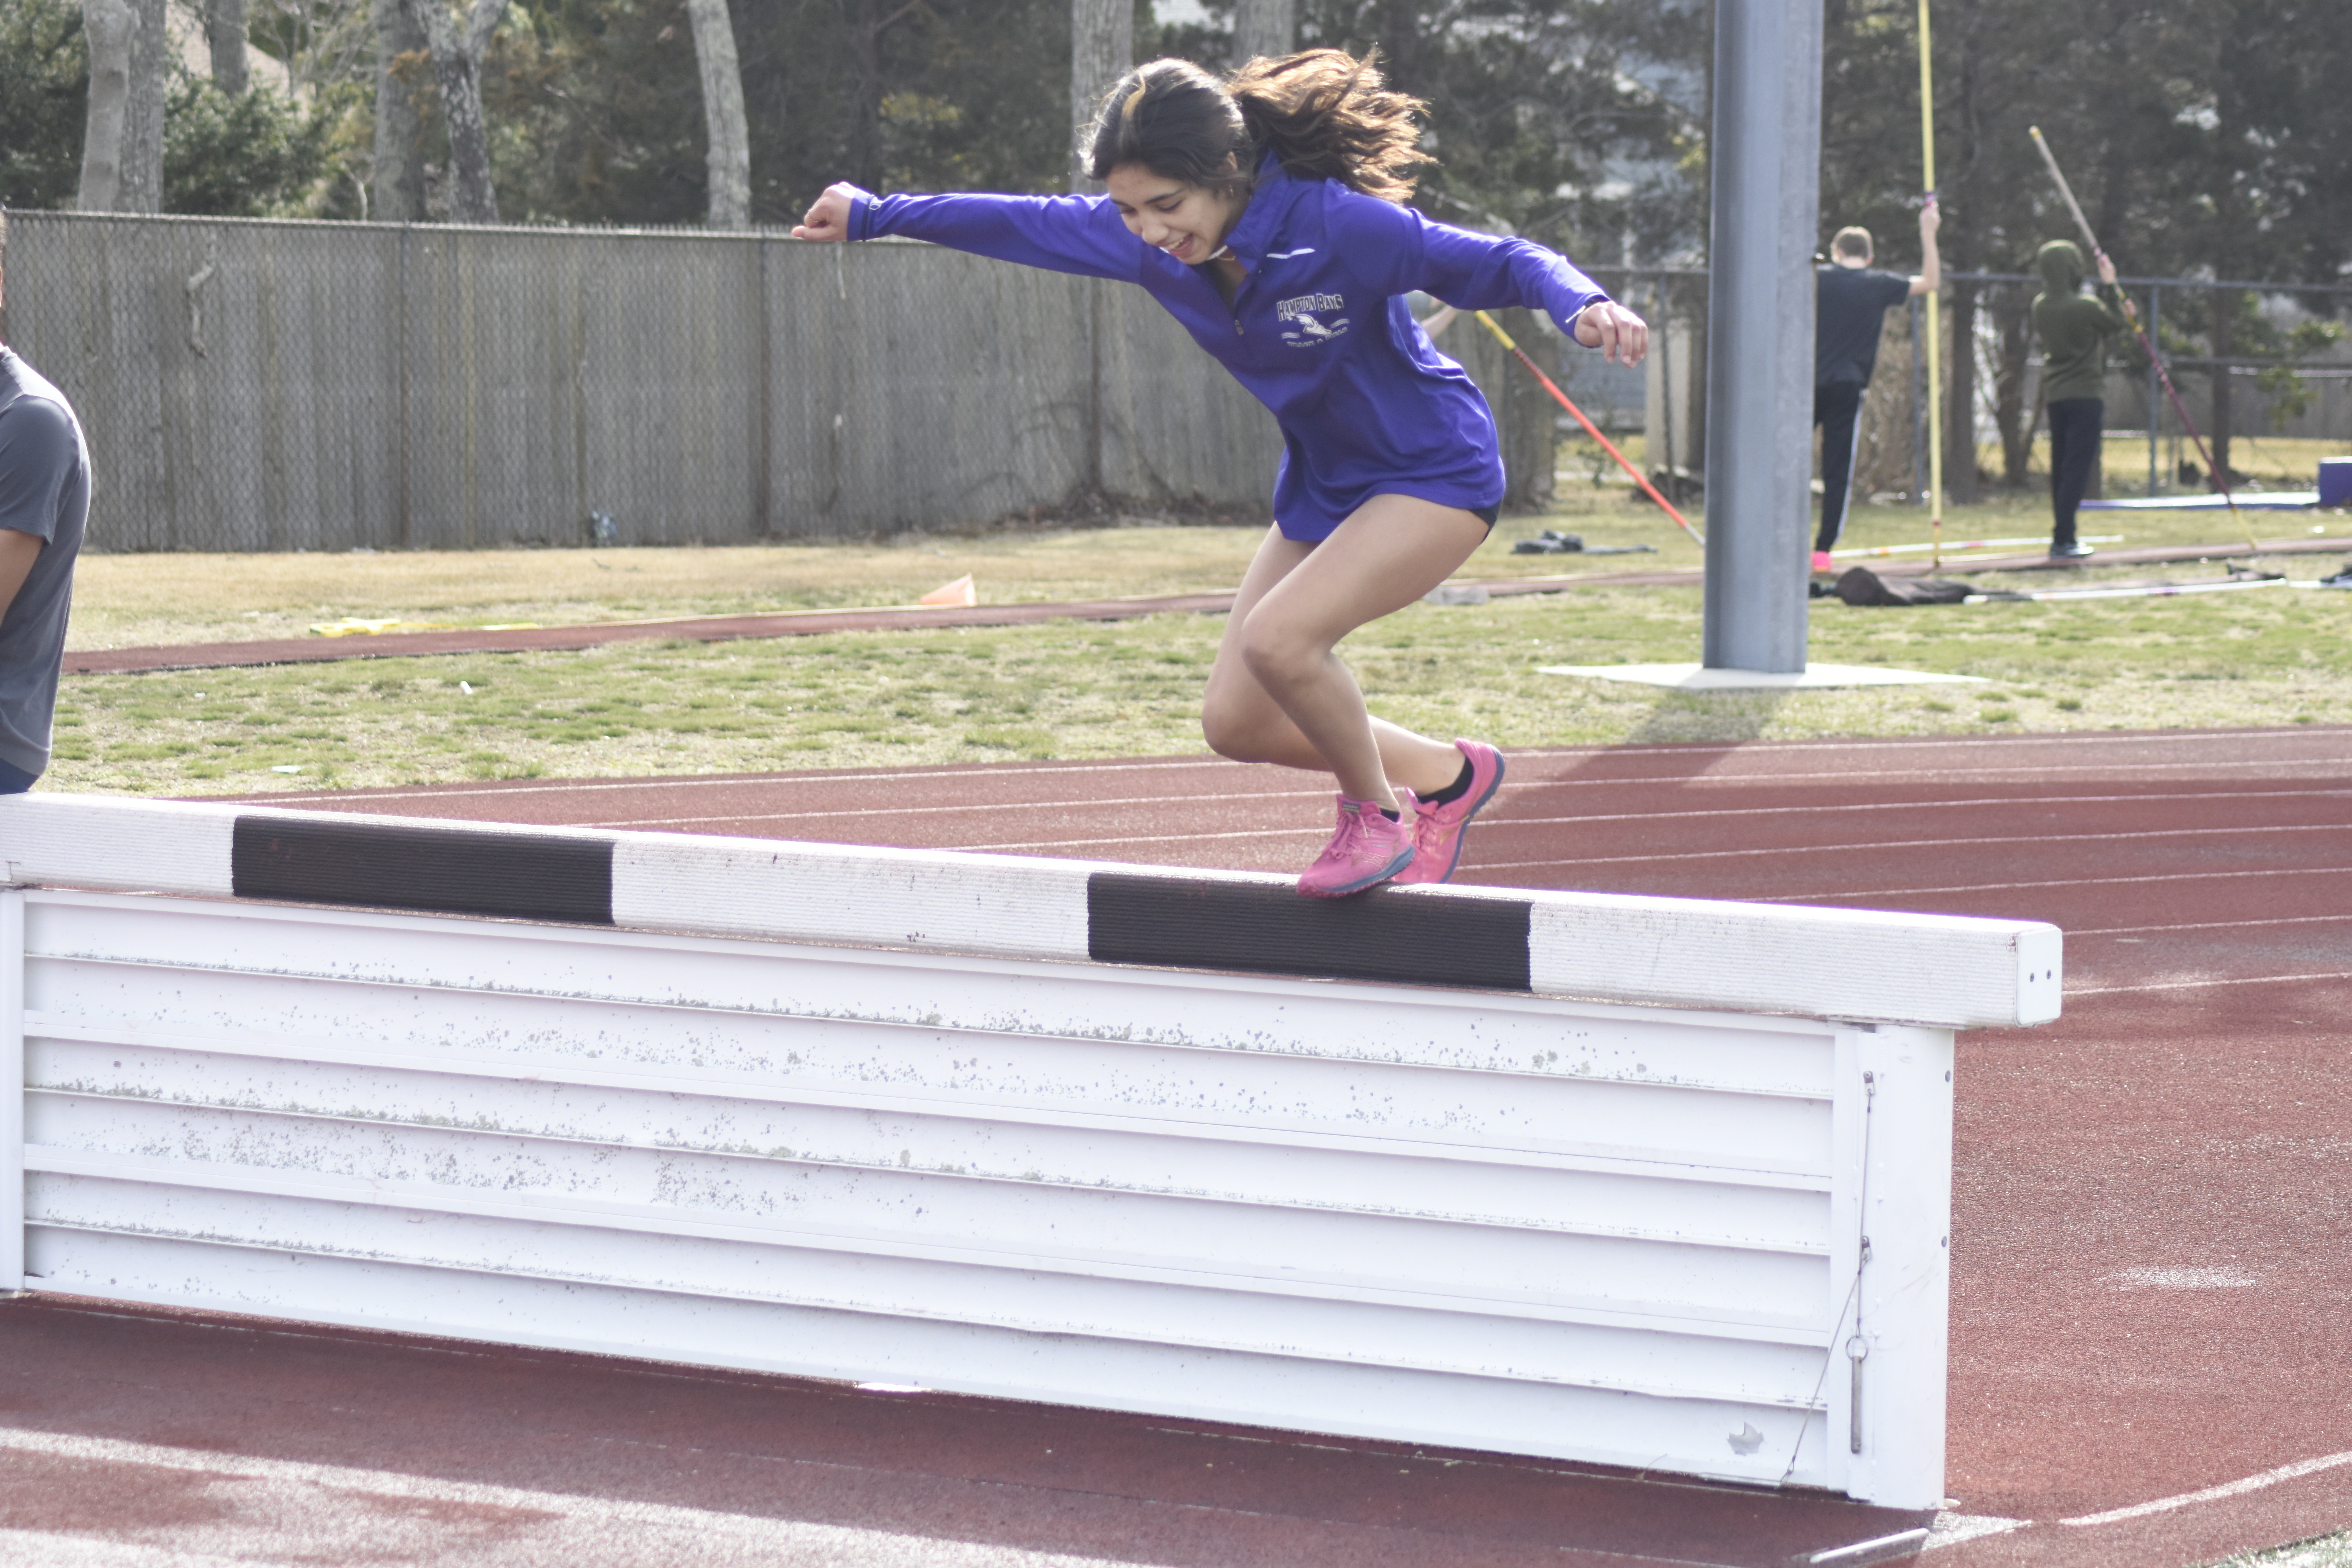 Sofia Galvan works on going over a steeplechase barrier during practice on Friday.   DREW BUDD